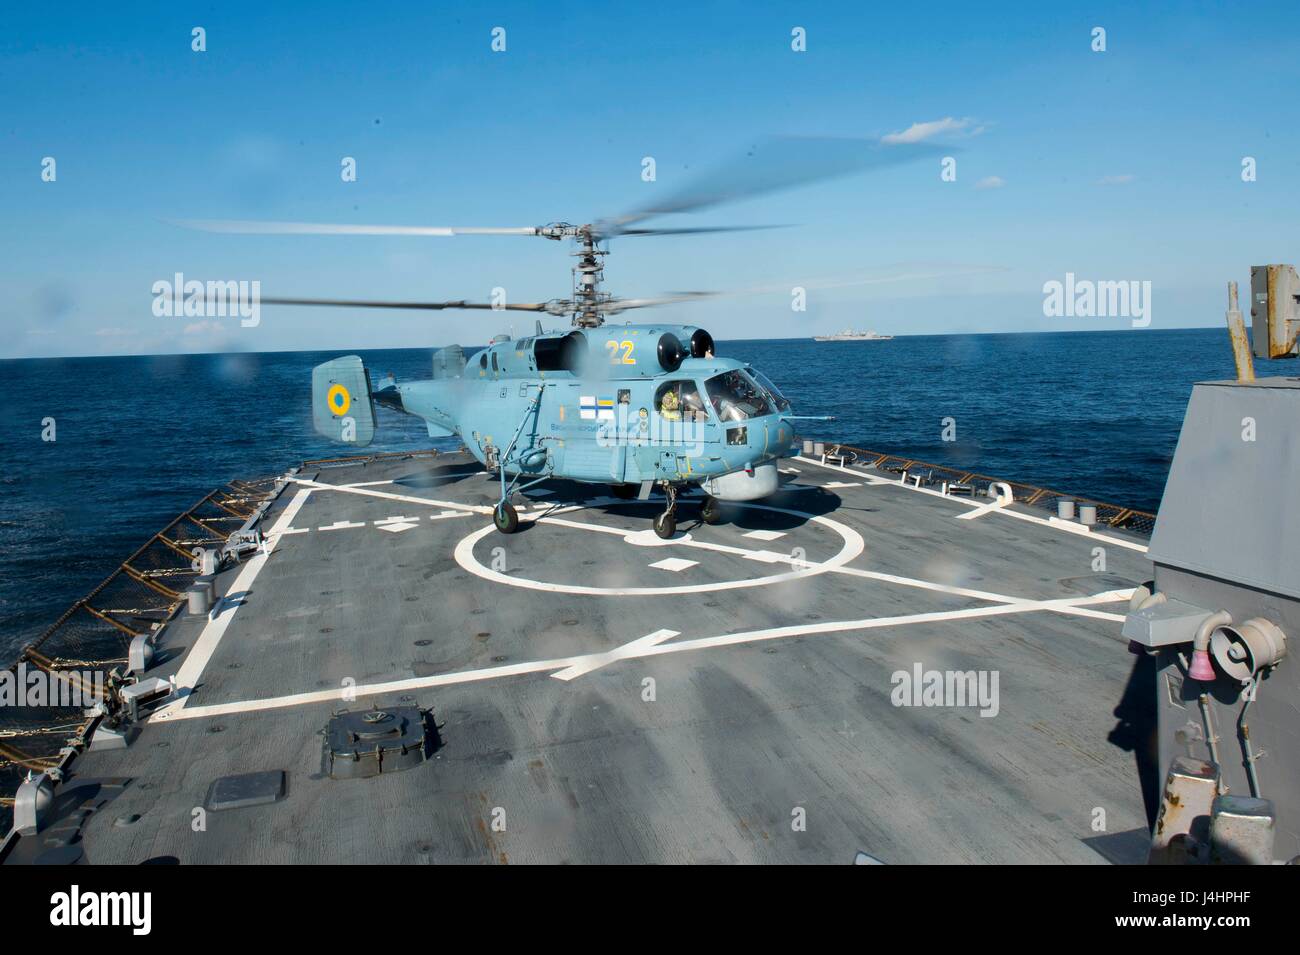 A Ukrainian Navy KA-27 Helix helicopter lands on the flight deck aboard the USN Arleigh Burke-class guided-missile destroyer USS Donald Cook during exercise Sea Breeze September 8, 2015 in the Black Sea.     (photo by Sean Spratt /US Navy  via Planetpix) Stock Photo